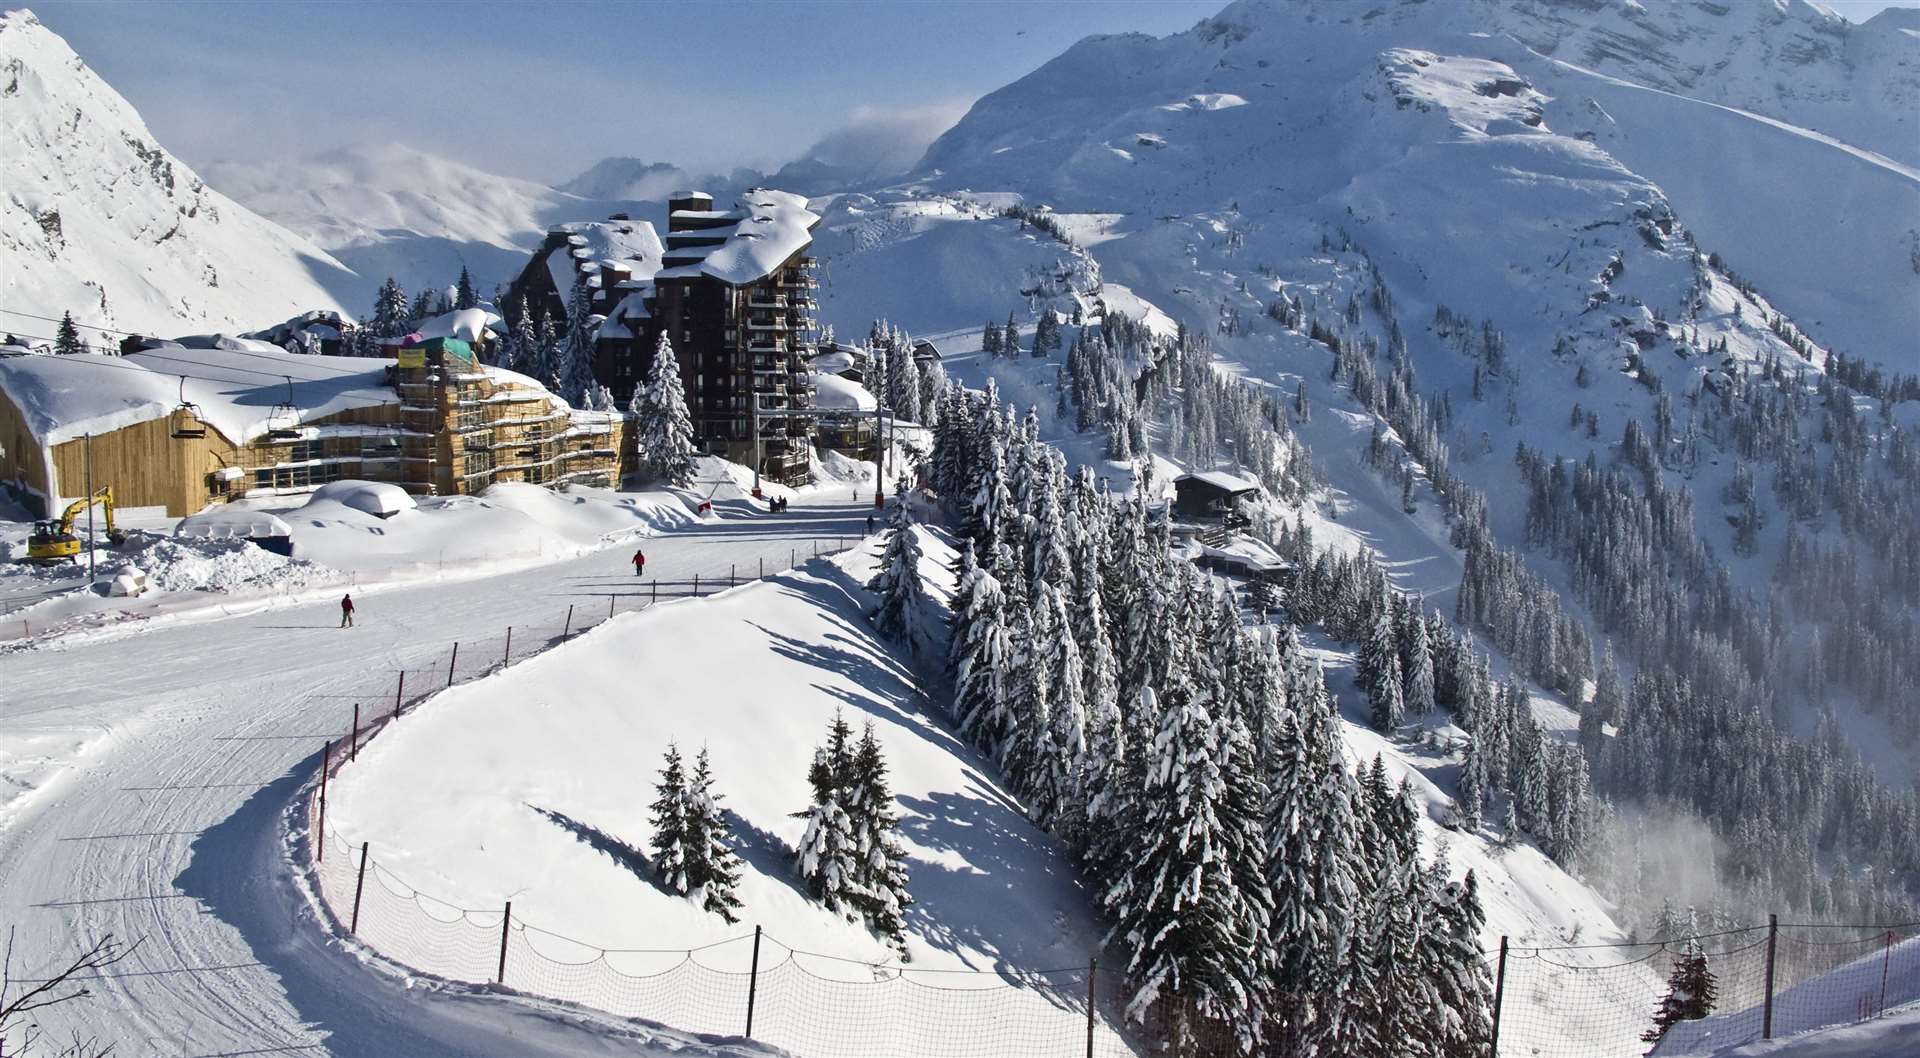 You can take in some of the most breathtaking panoramic scenery of the Alps in Avoriaz.